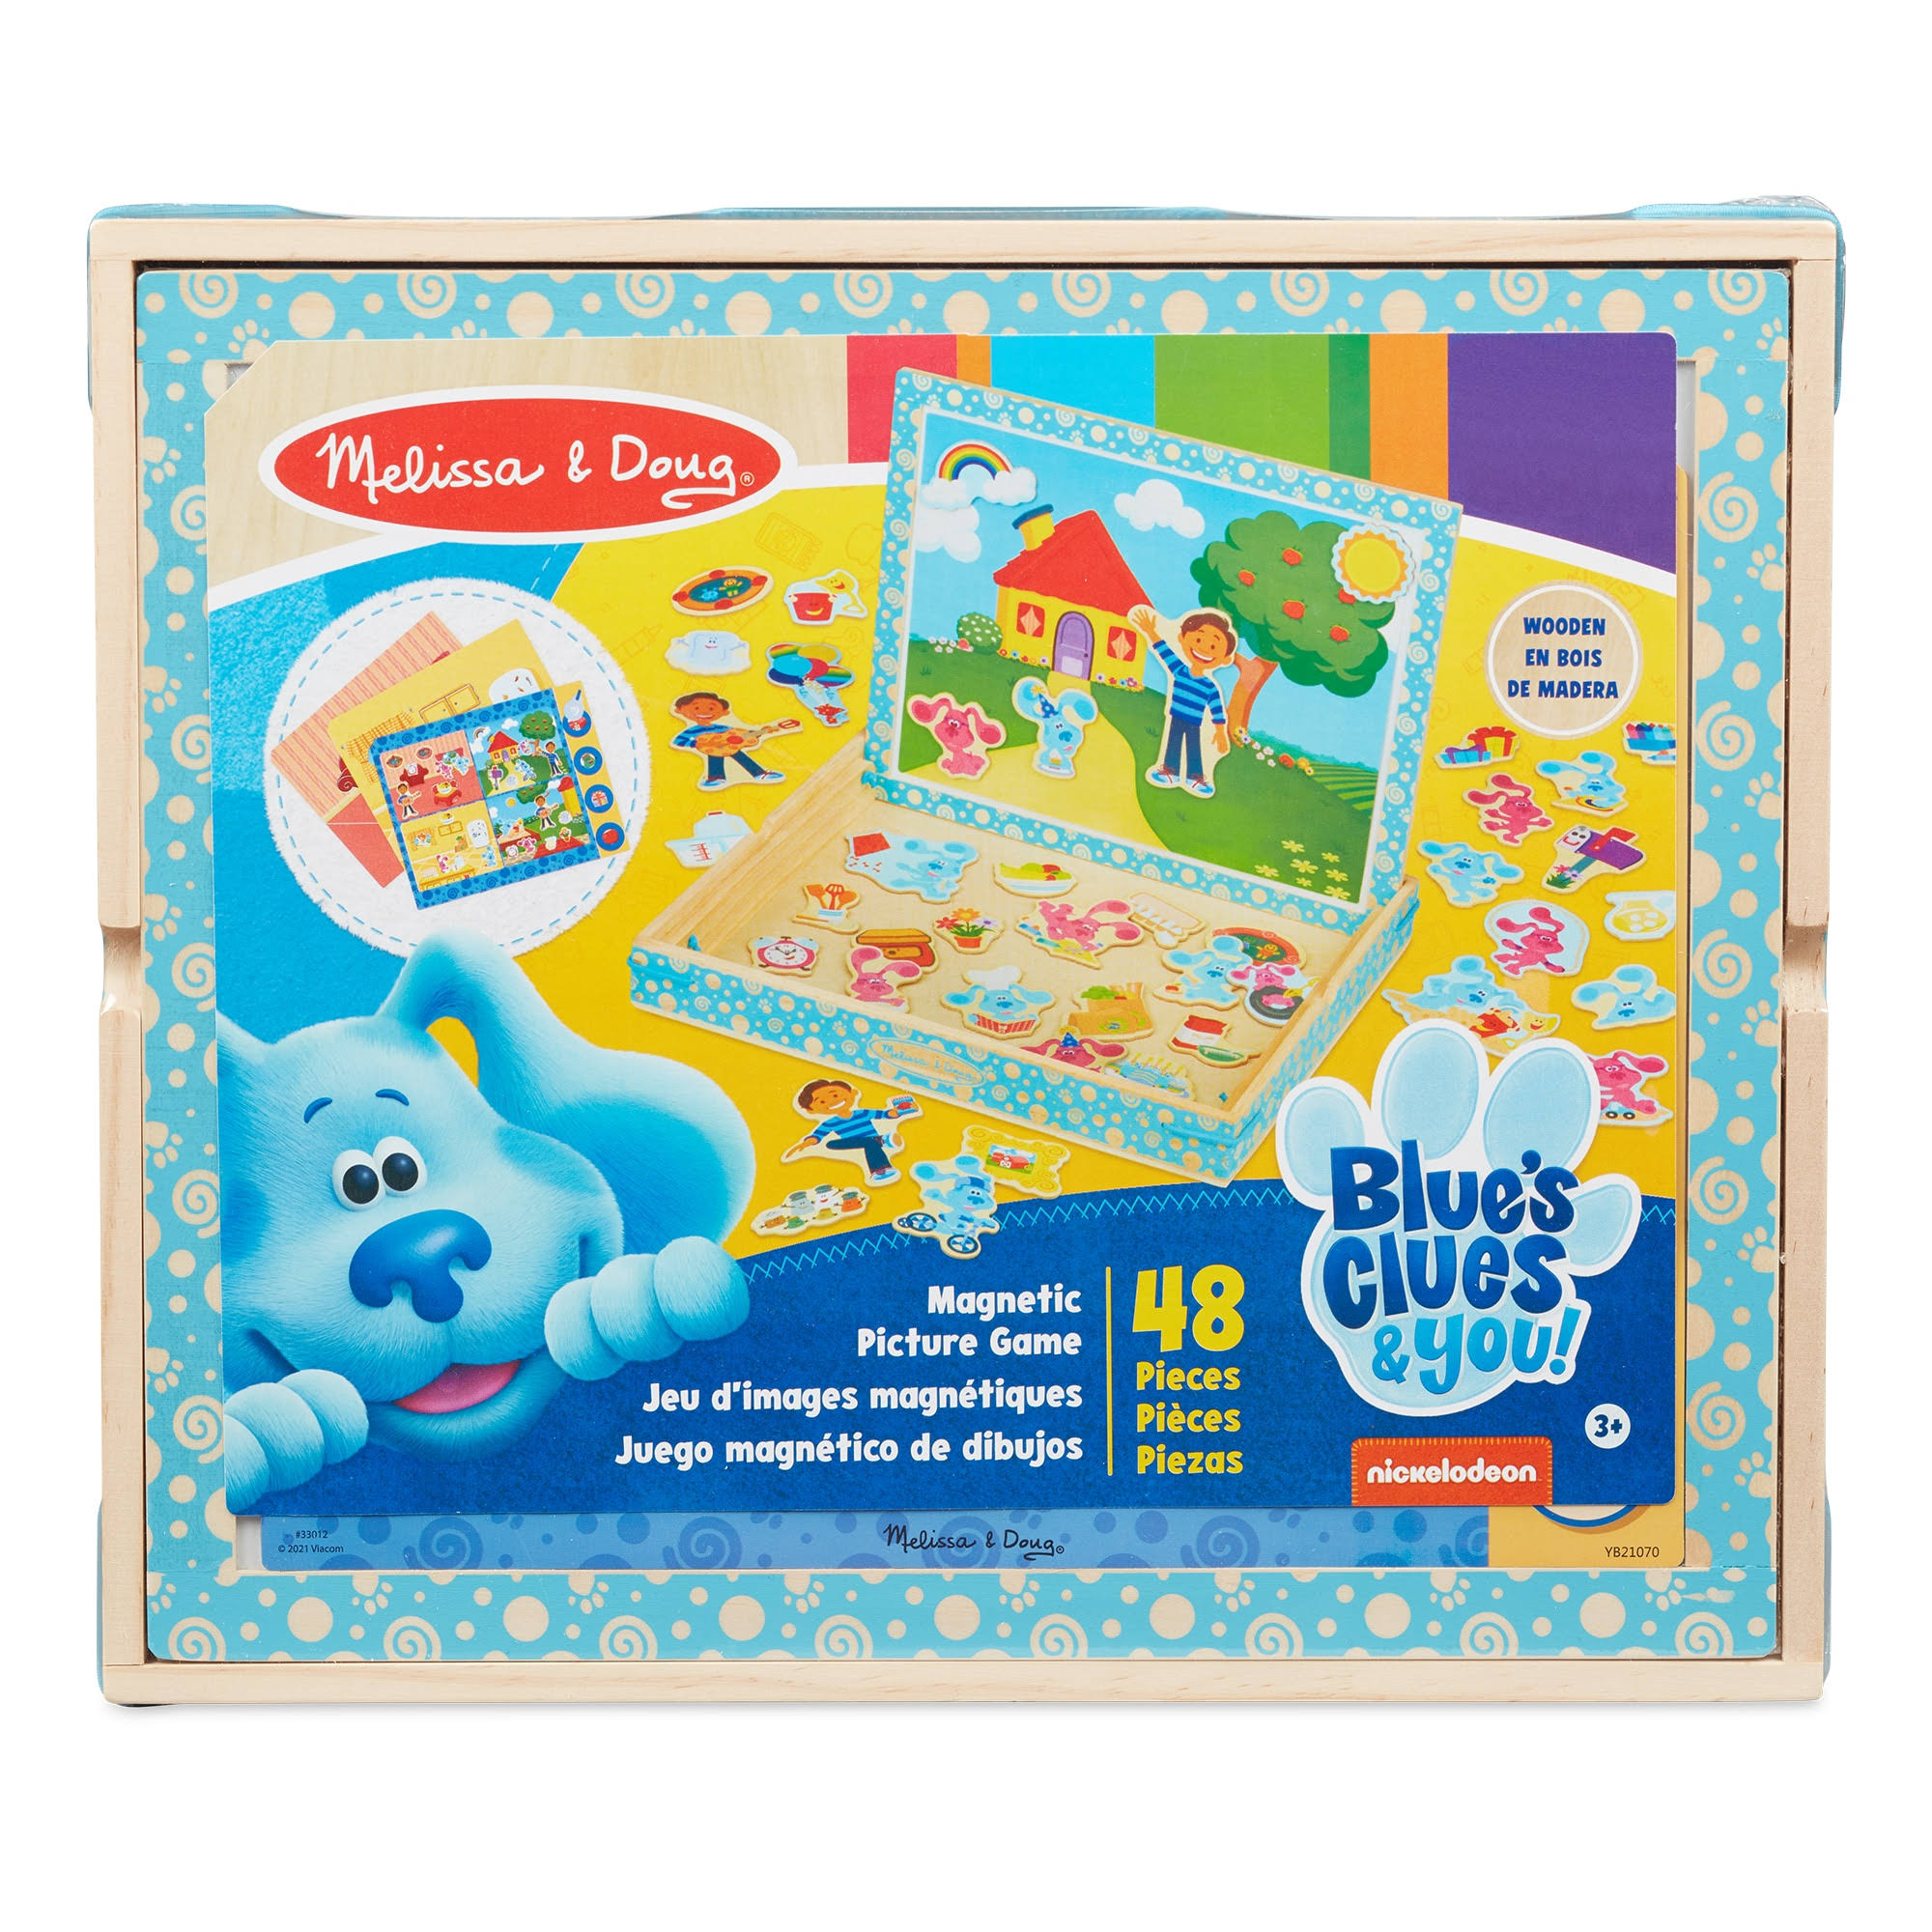 Melissa & Doug Blue's Clues and You - Magnetic Picture Game